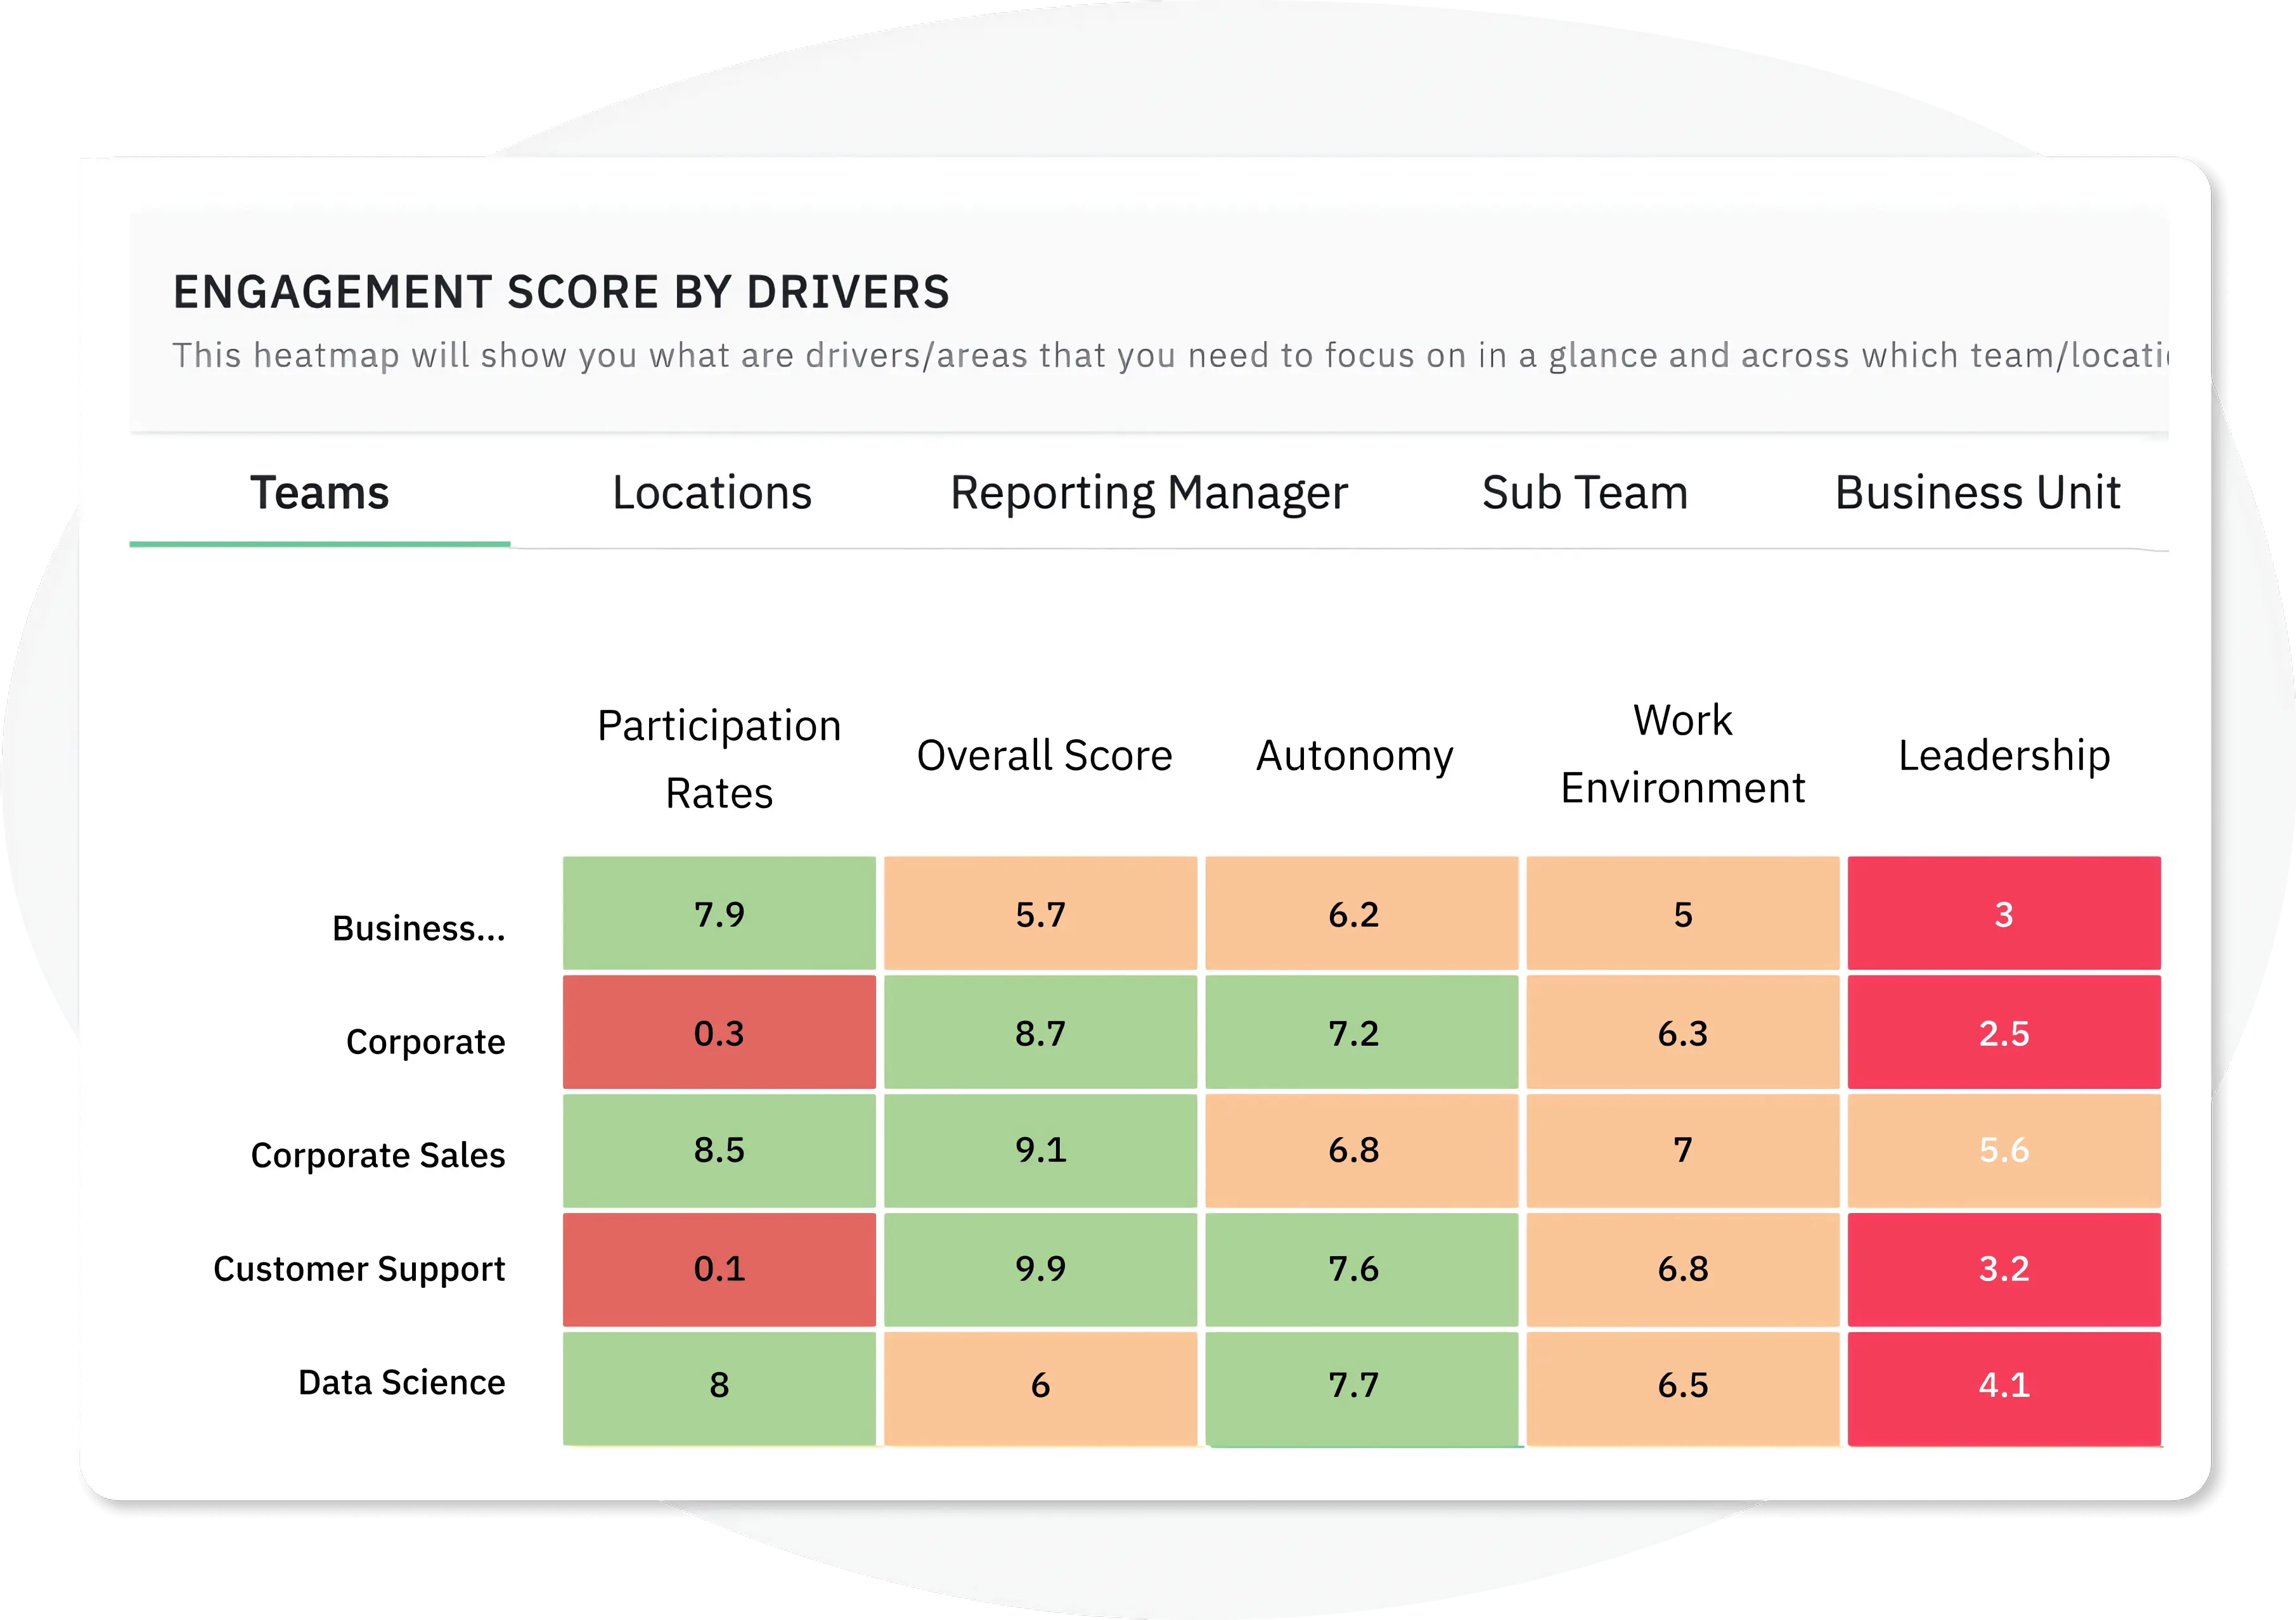 An employee feedback heat map report that paints you a clear picture of engagement score by drivers to track, monitor, and act accordingly.